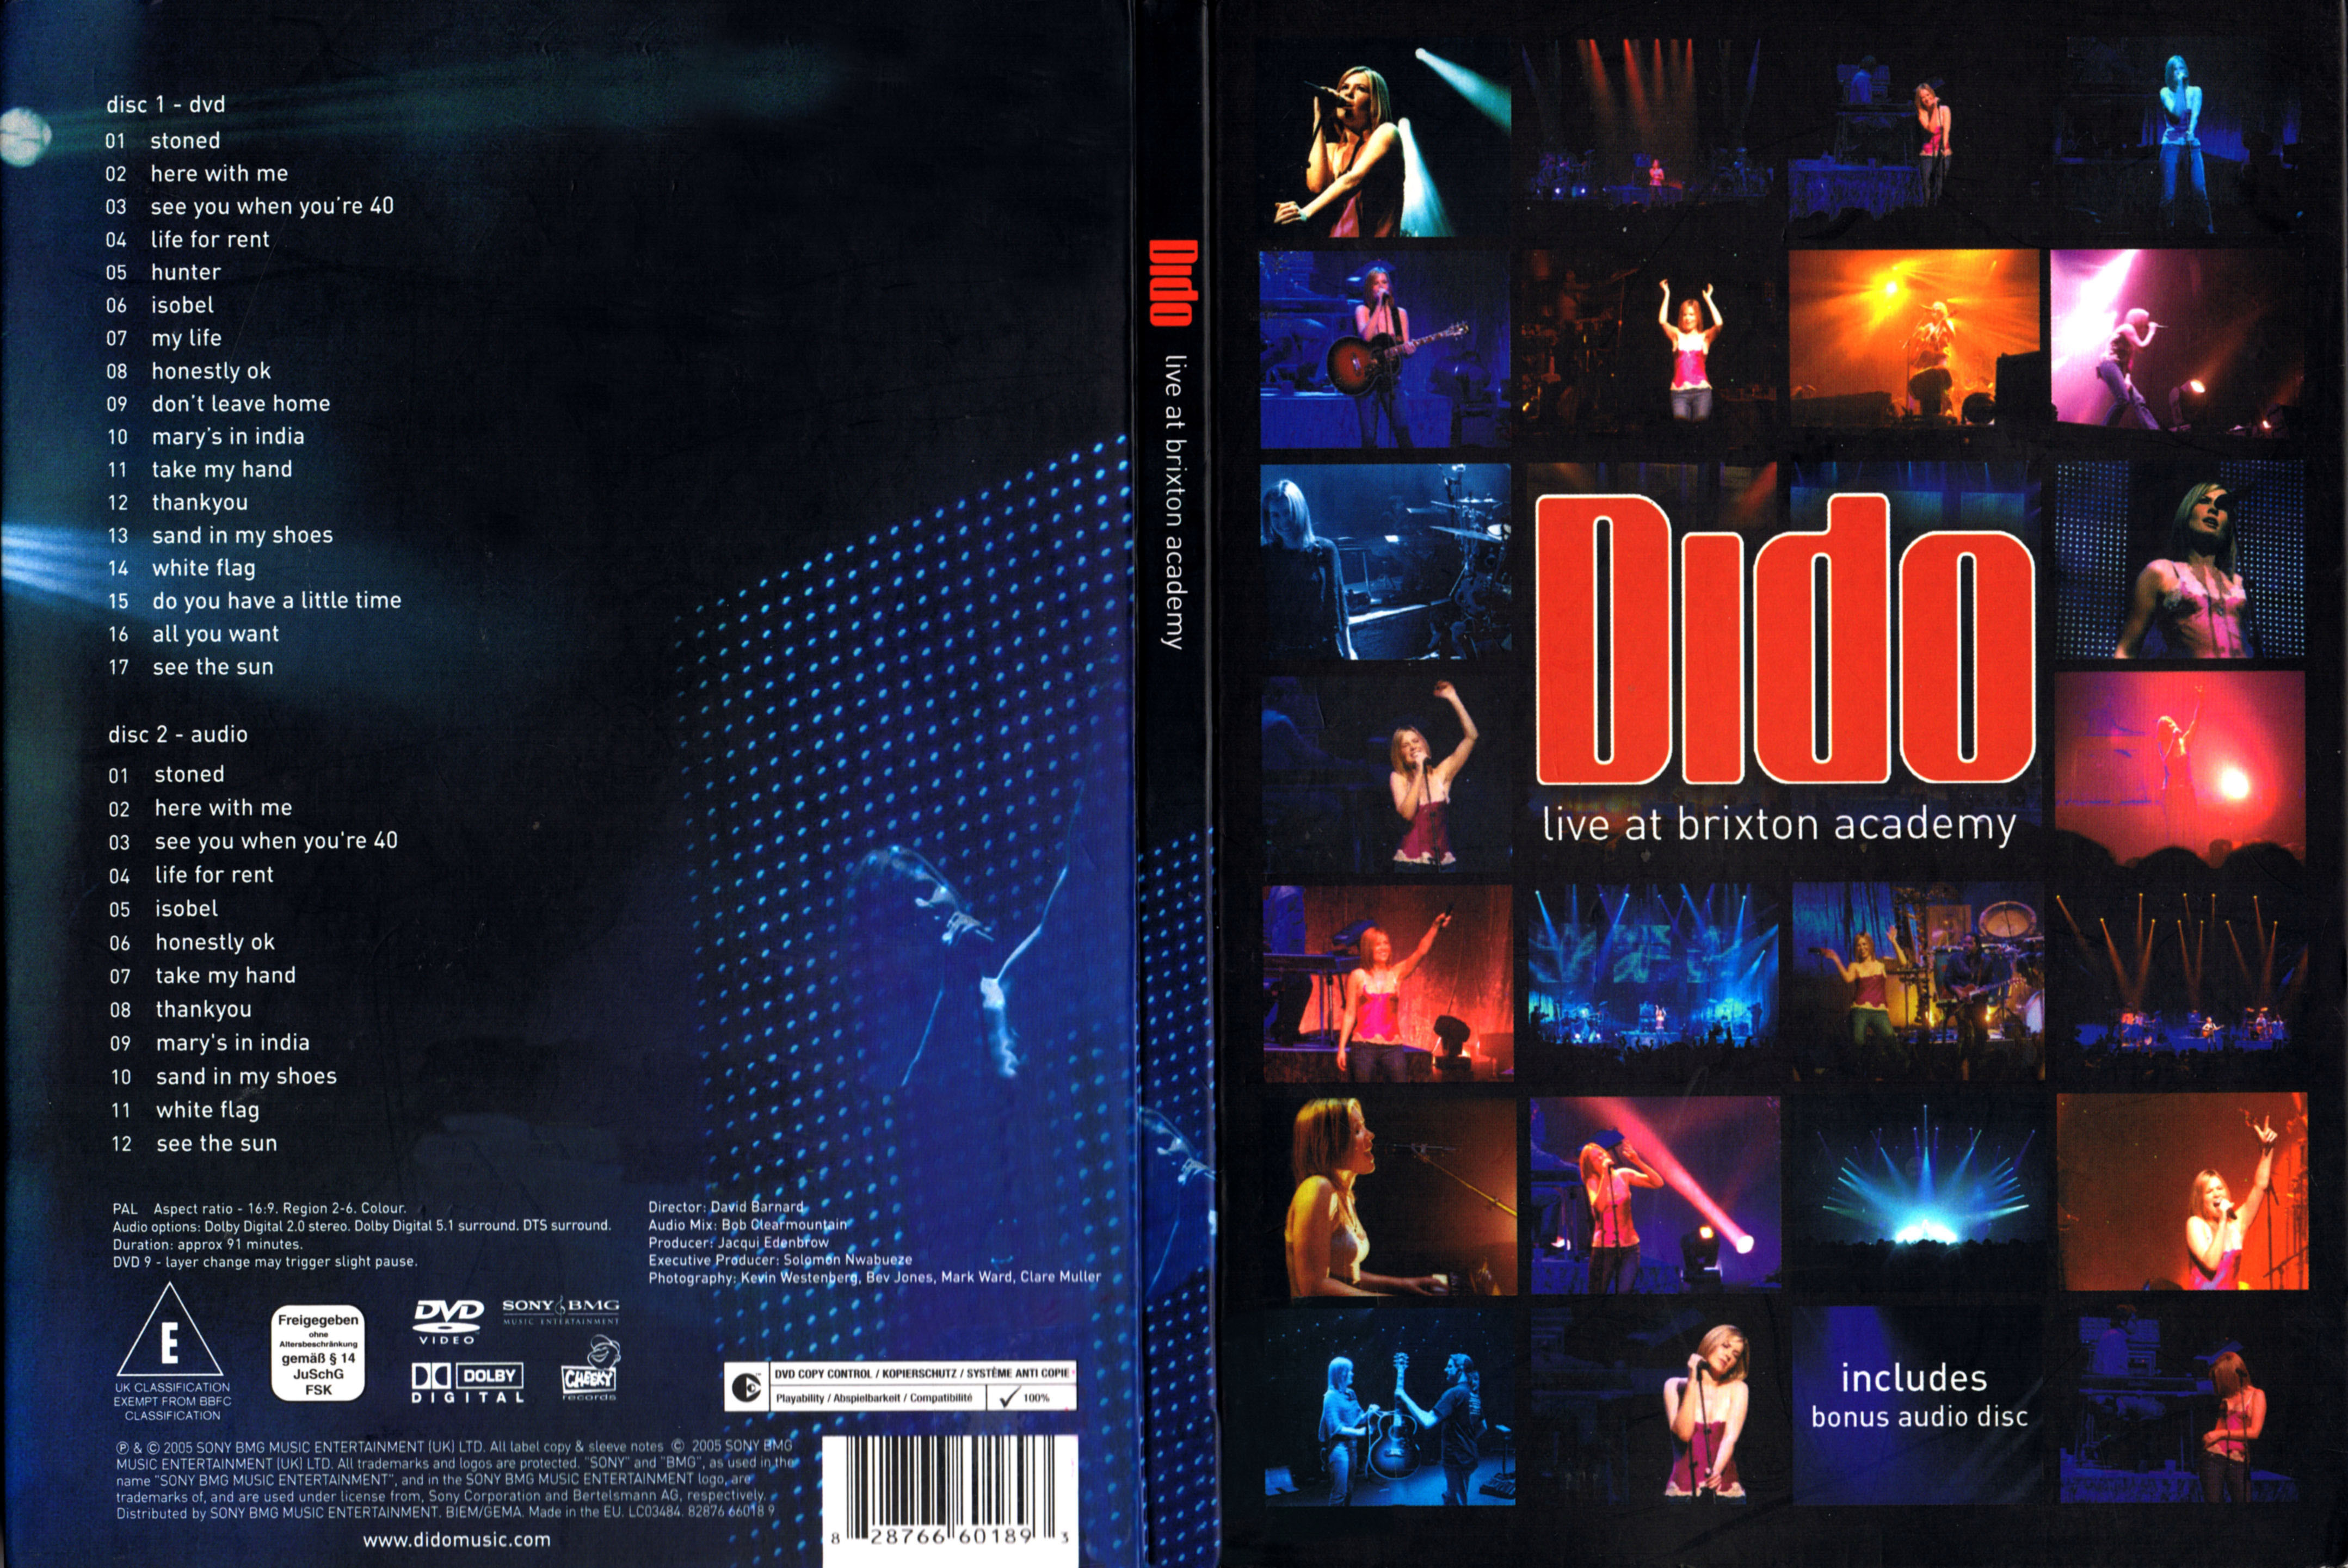 Jaquette DVD Dido live at brixton academy